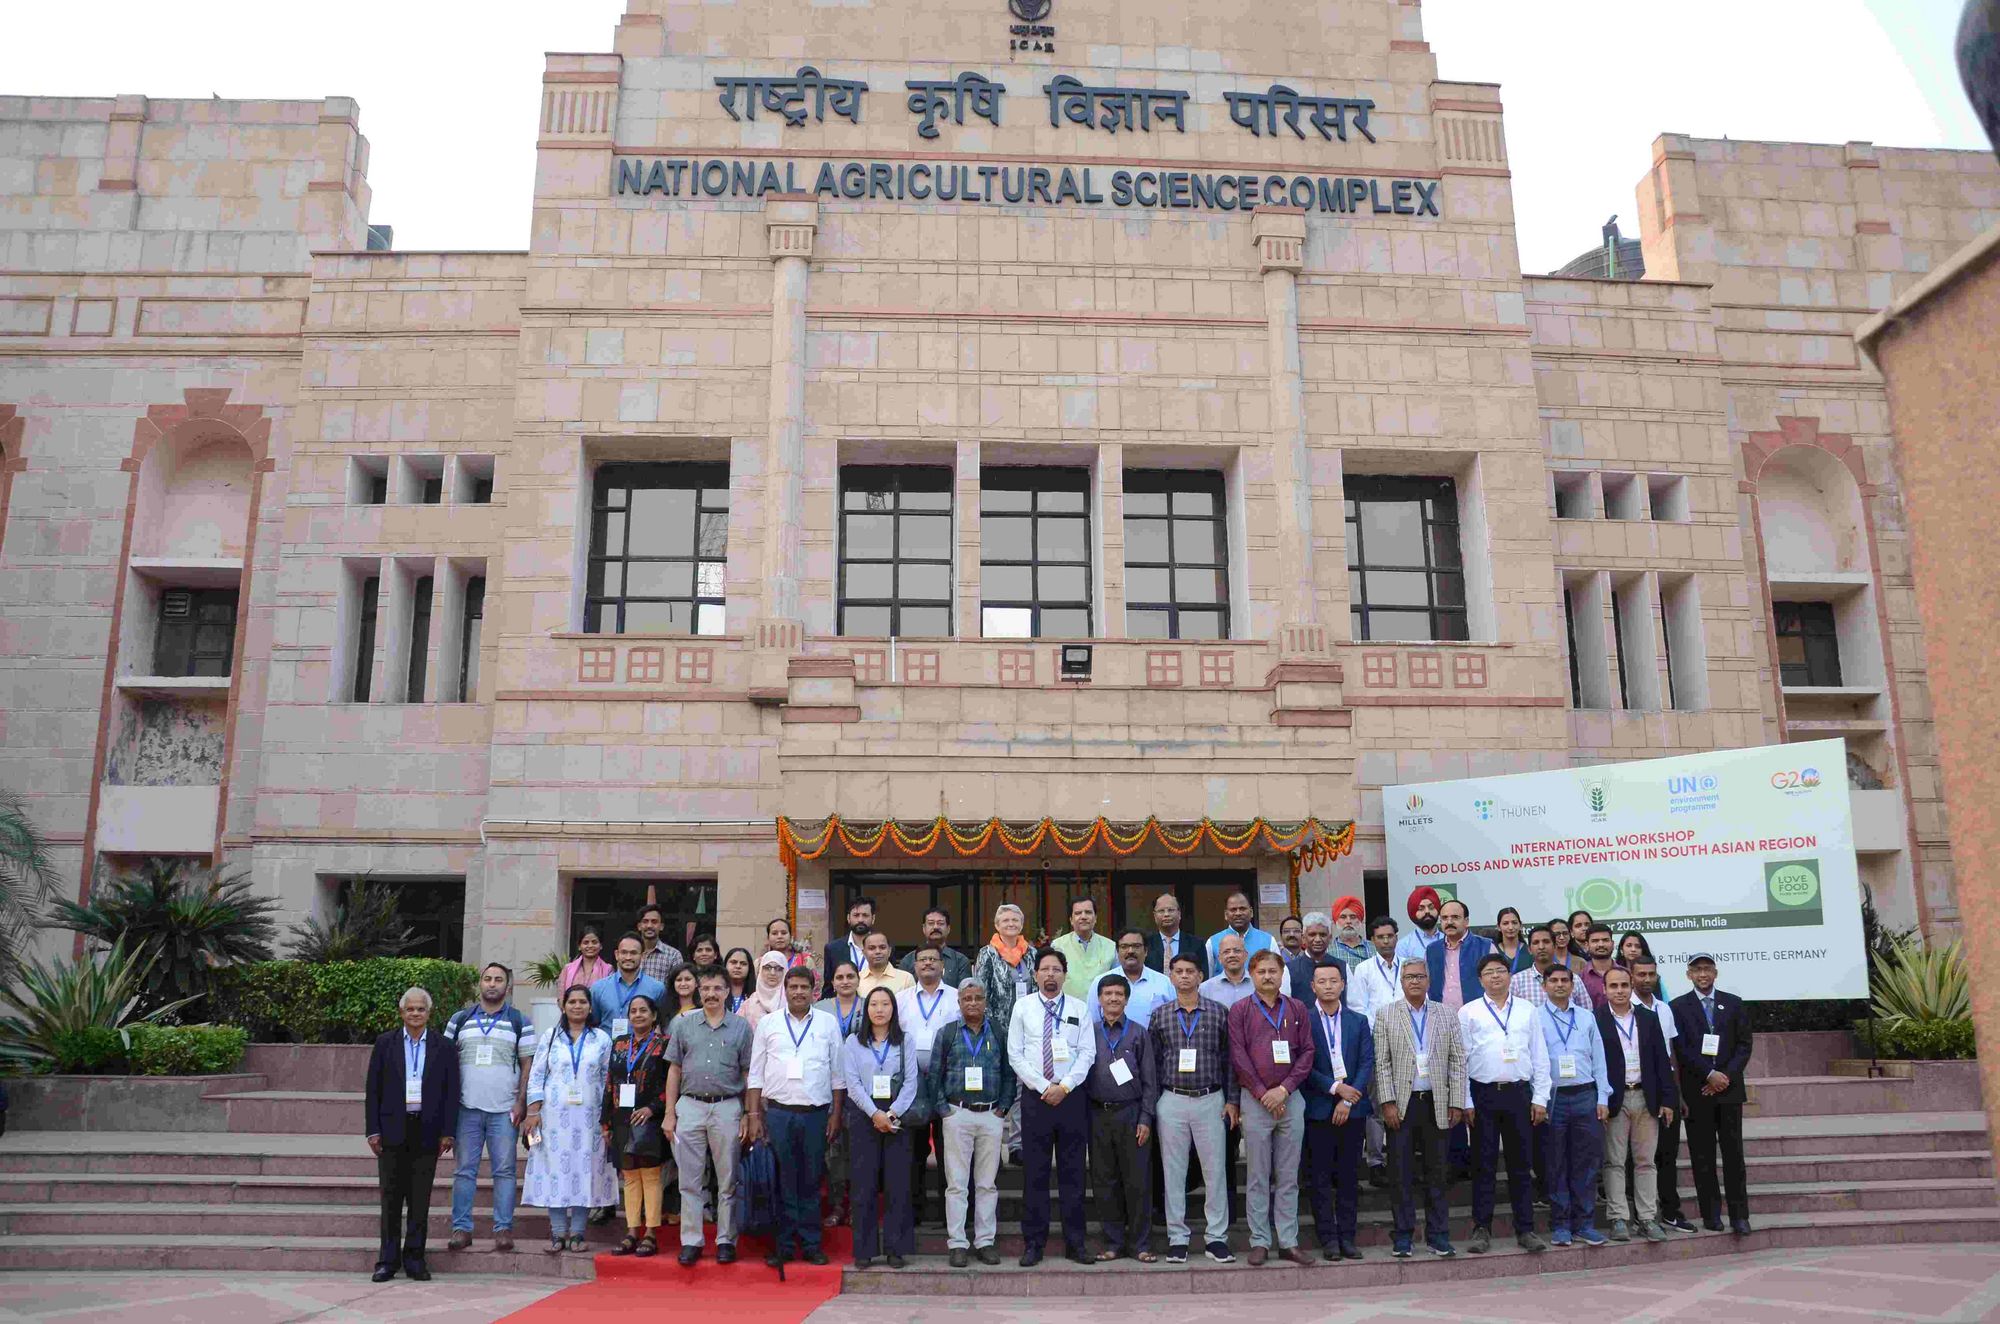 Farewell group photo at the end of the International Food Loss and Waste Prevention Workshop. 